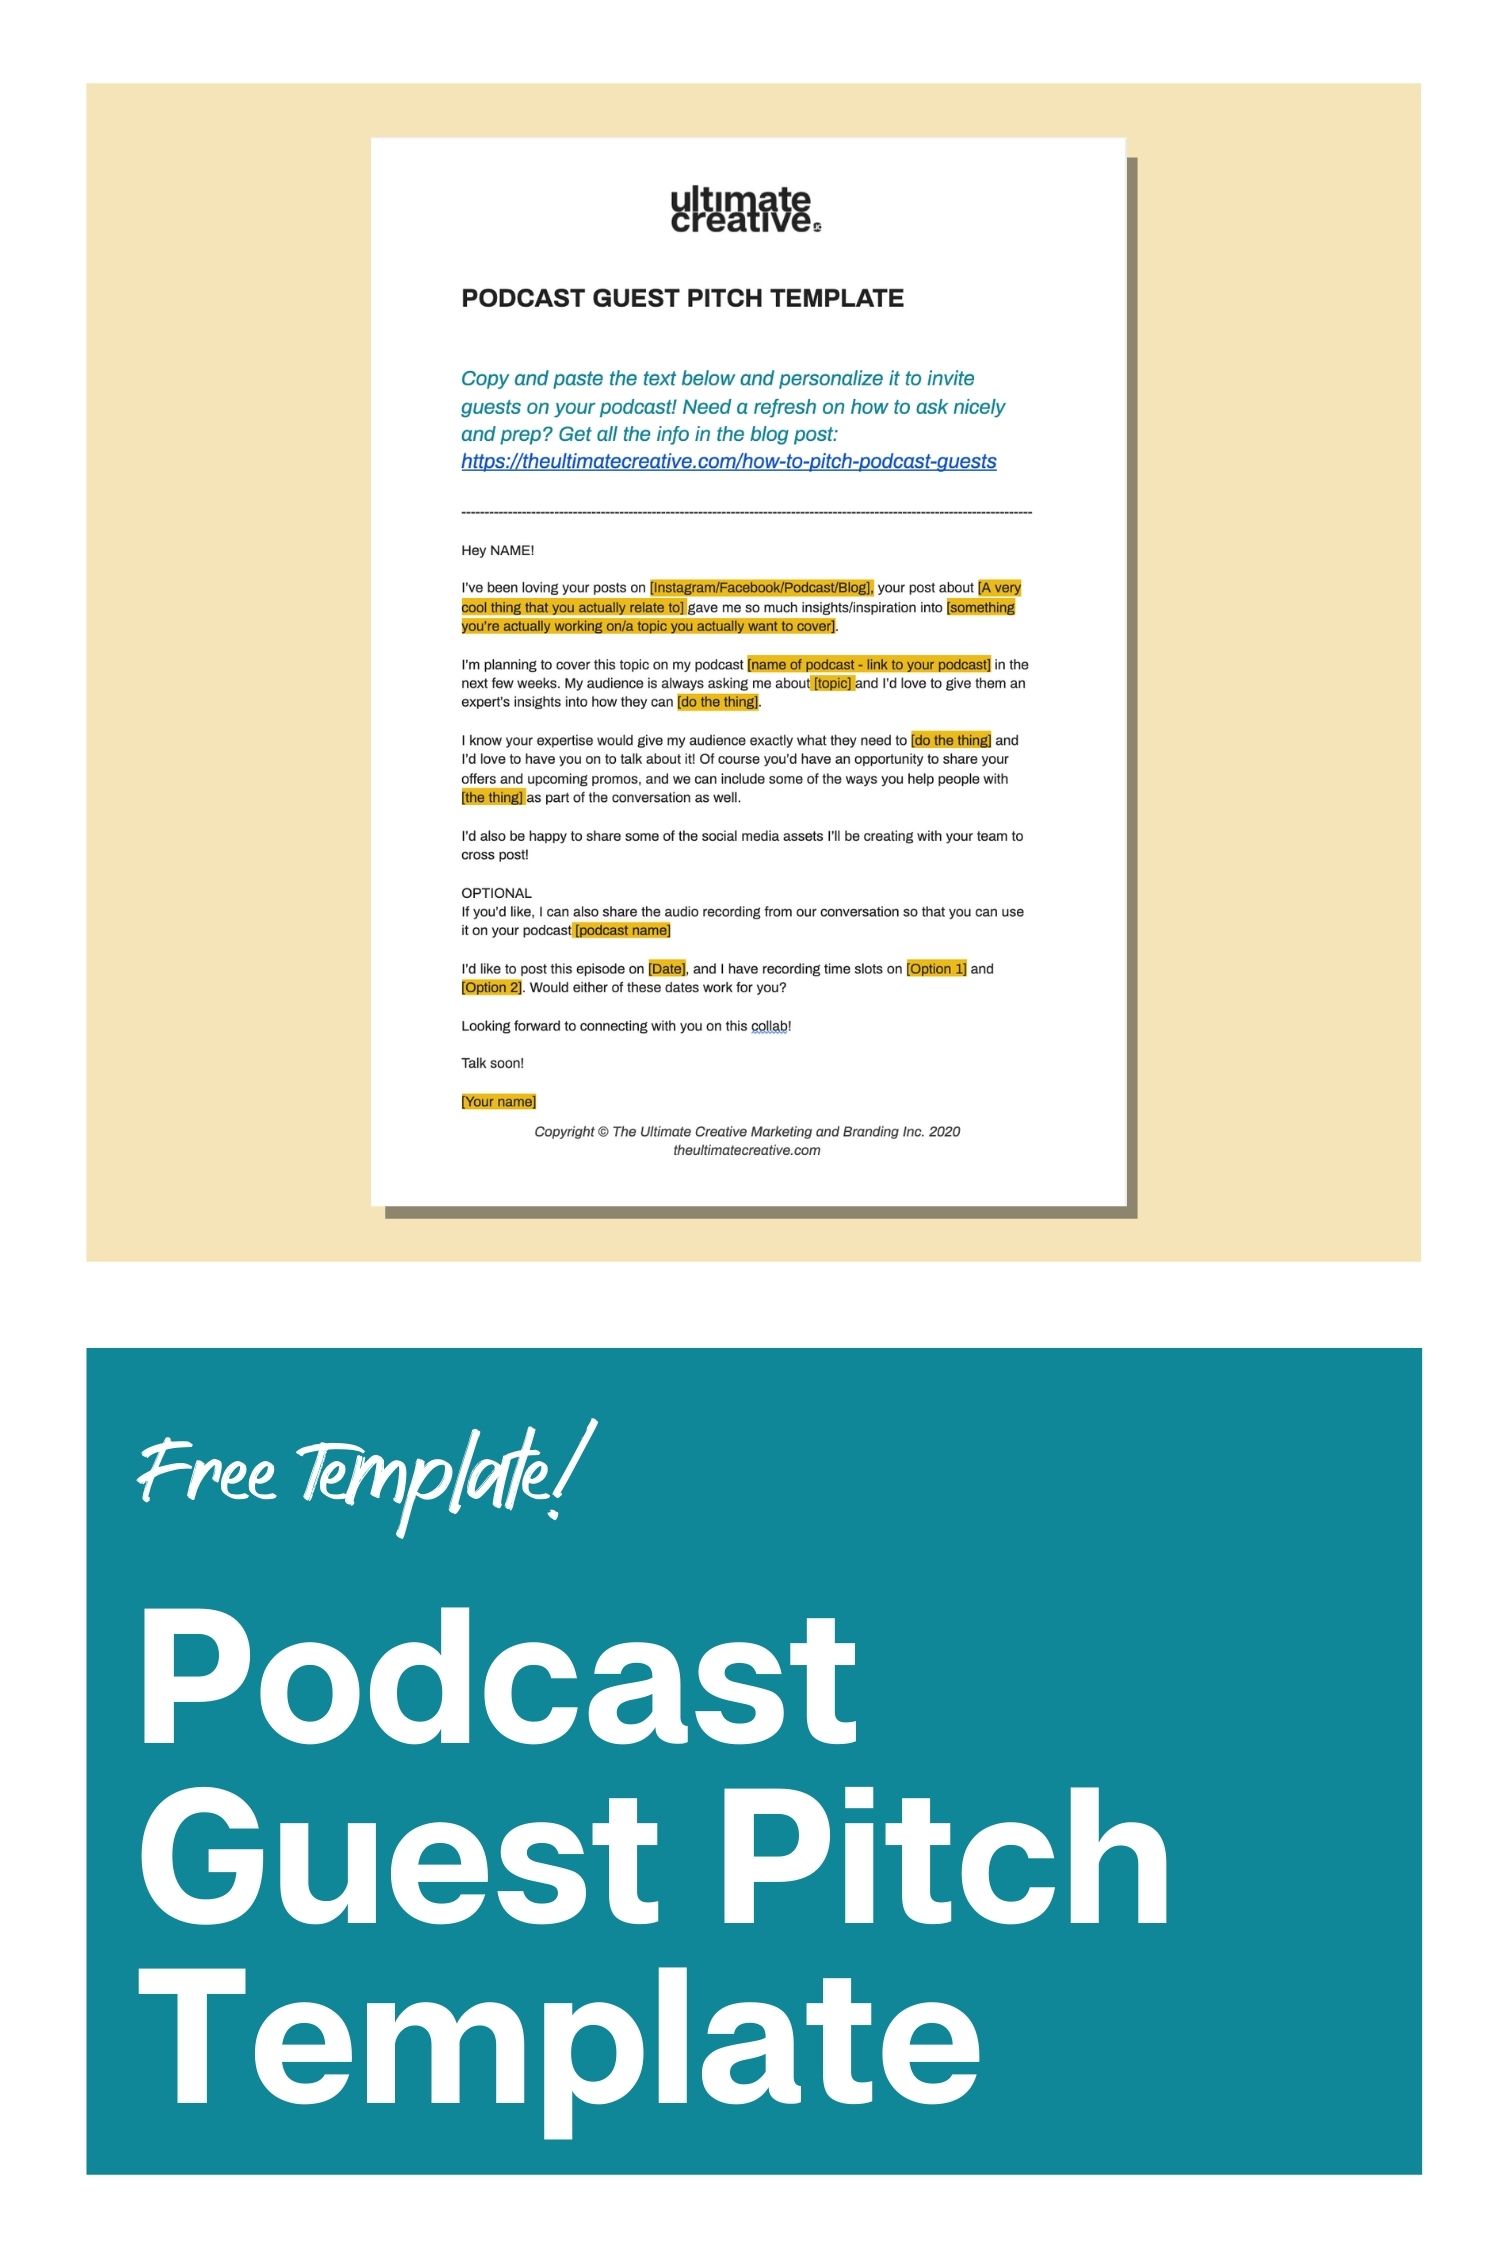 Podcast Guest Pitch Template Pinnable Image 